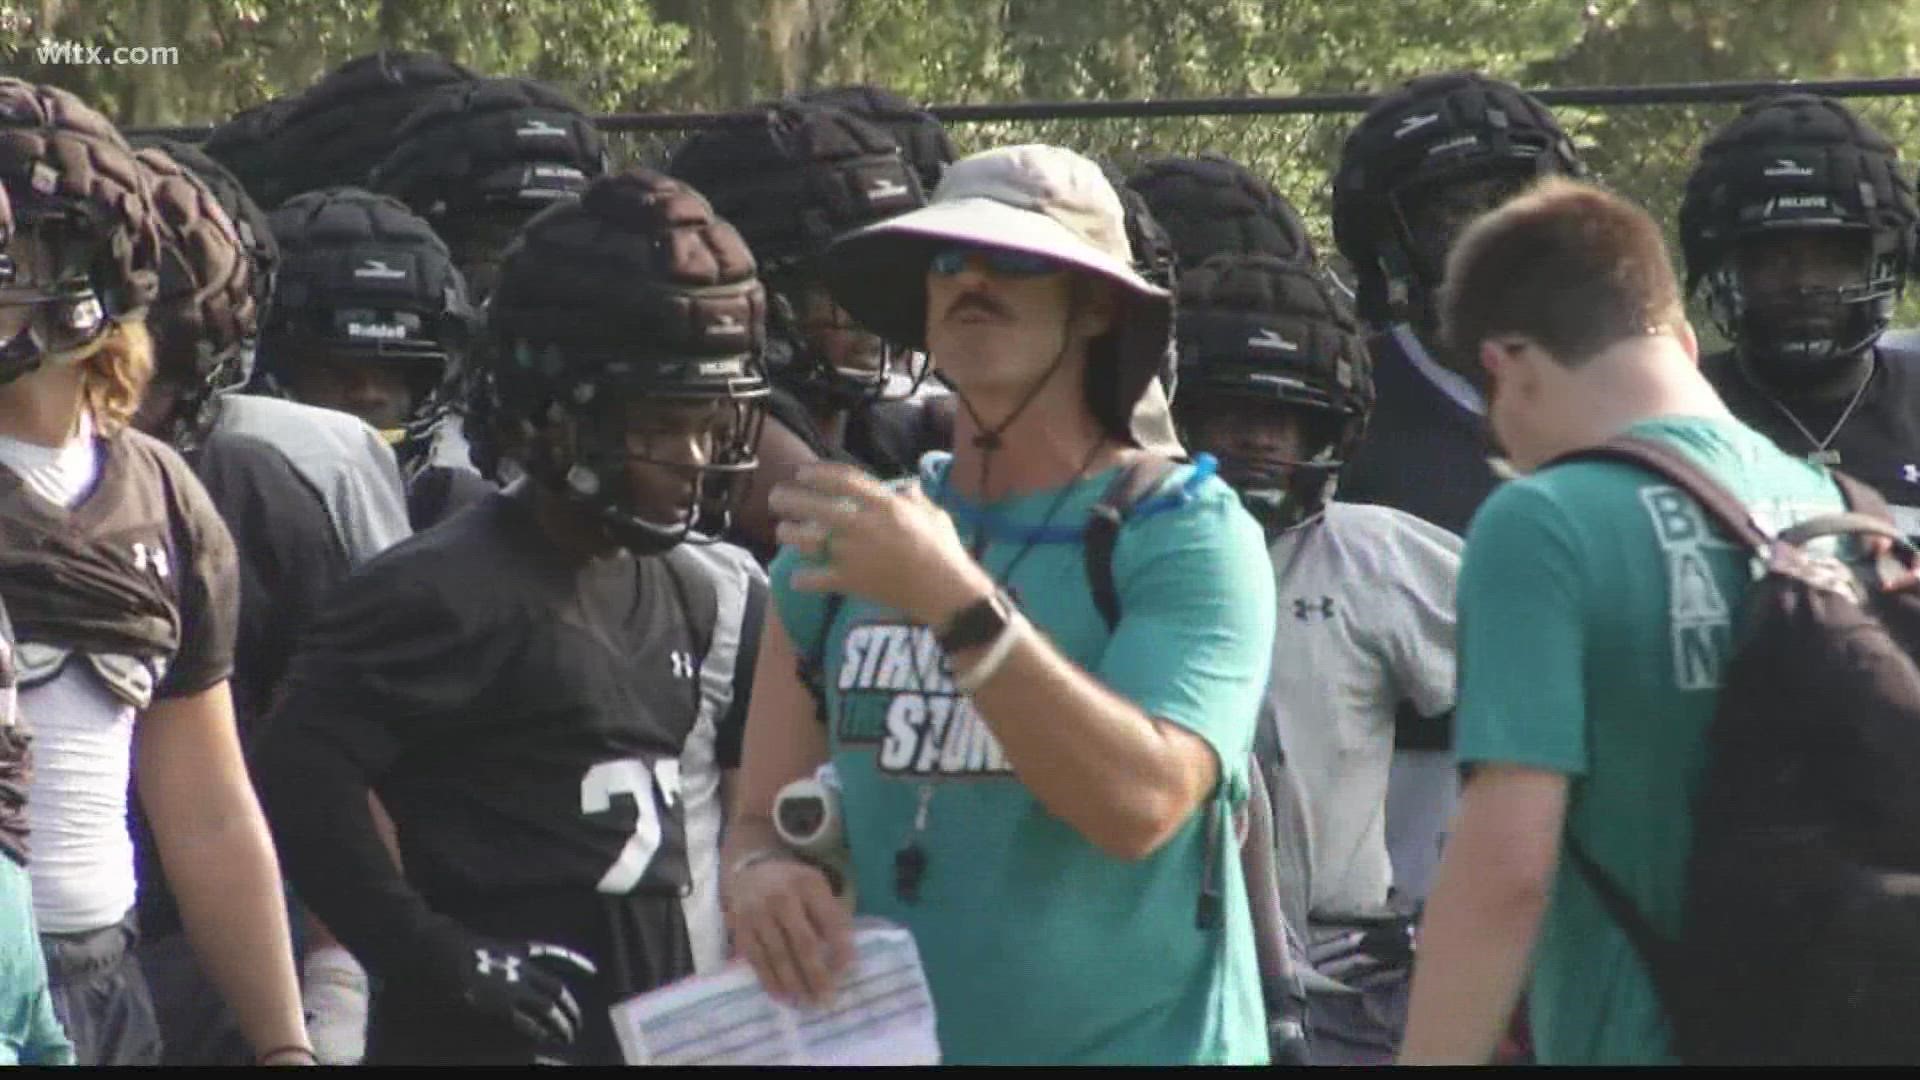 Coastal Carolina has kicked off preseason practice with an eye on improving on 2021 and not being distracted by looking back on the historic bowl win.